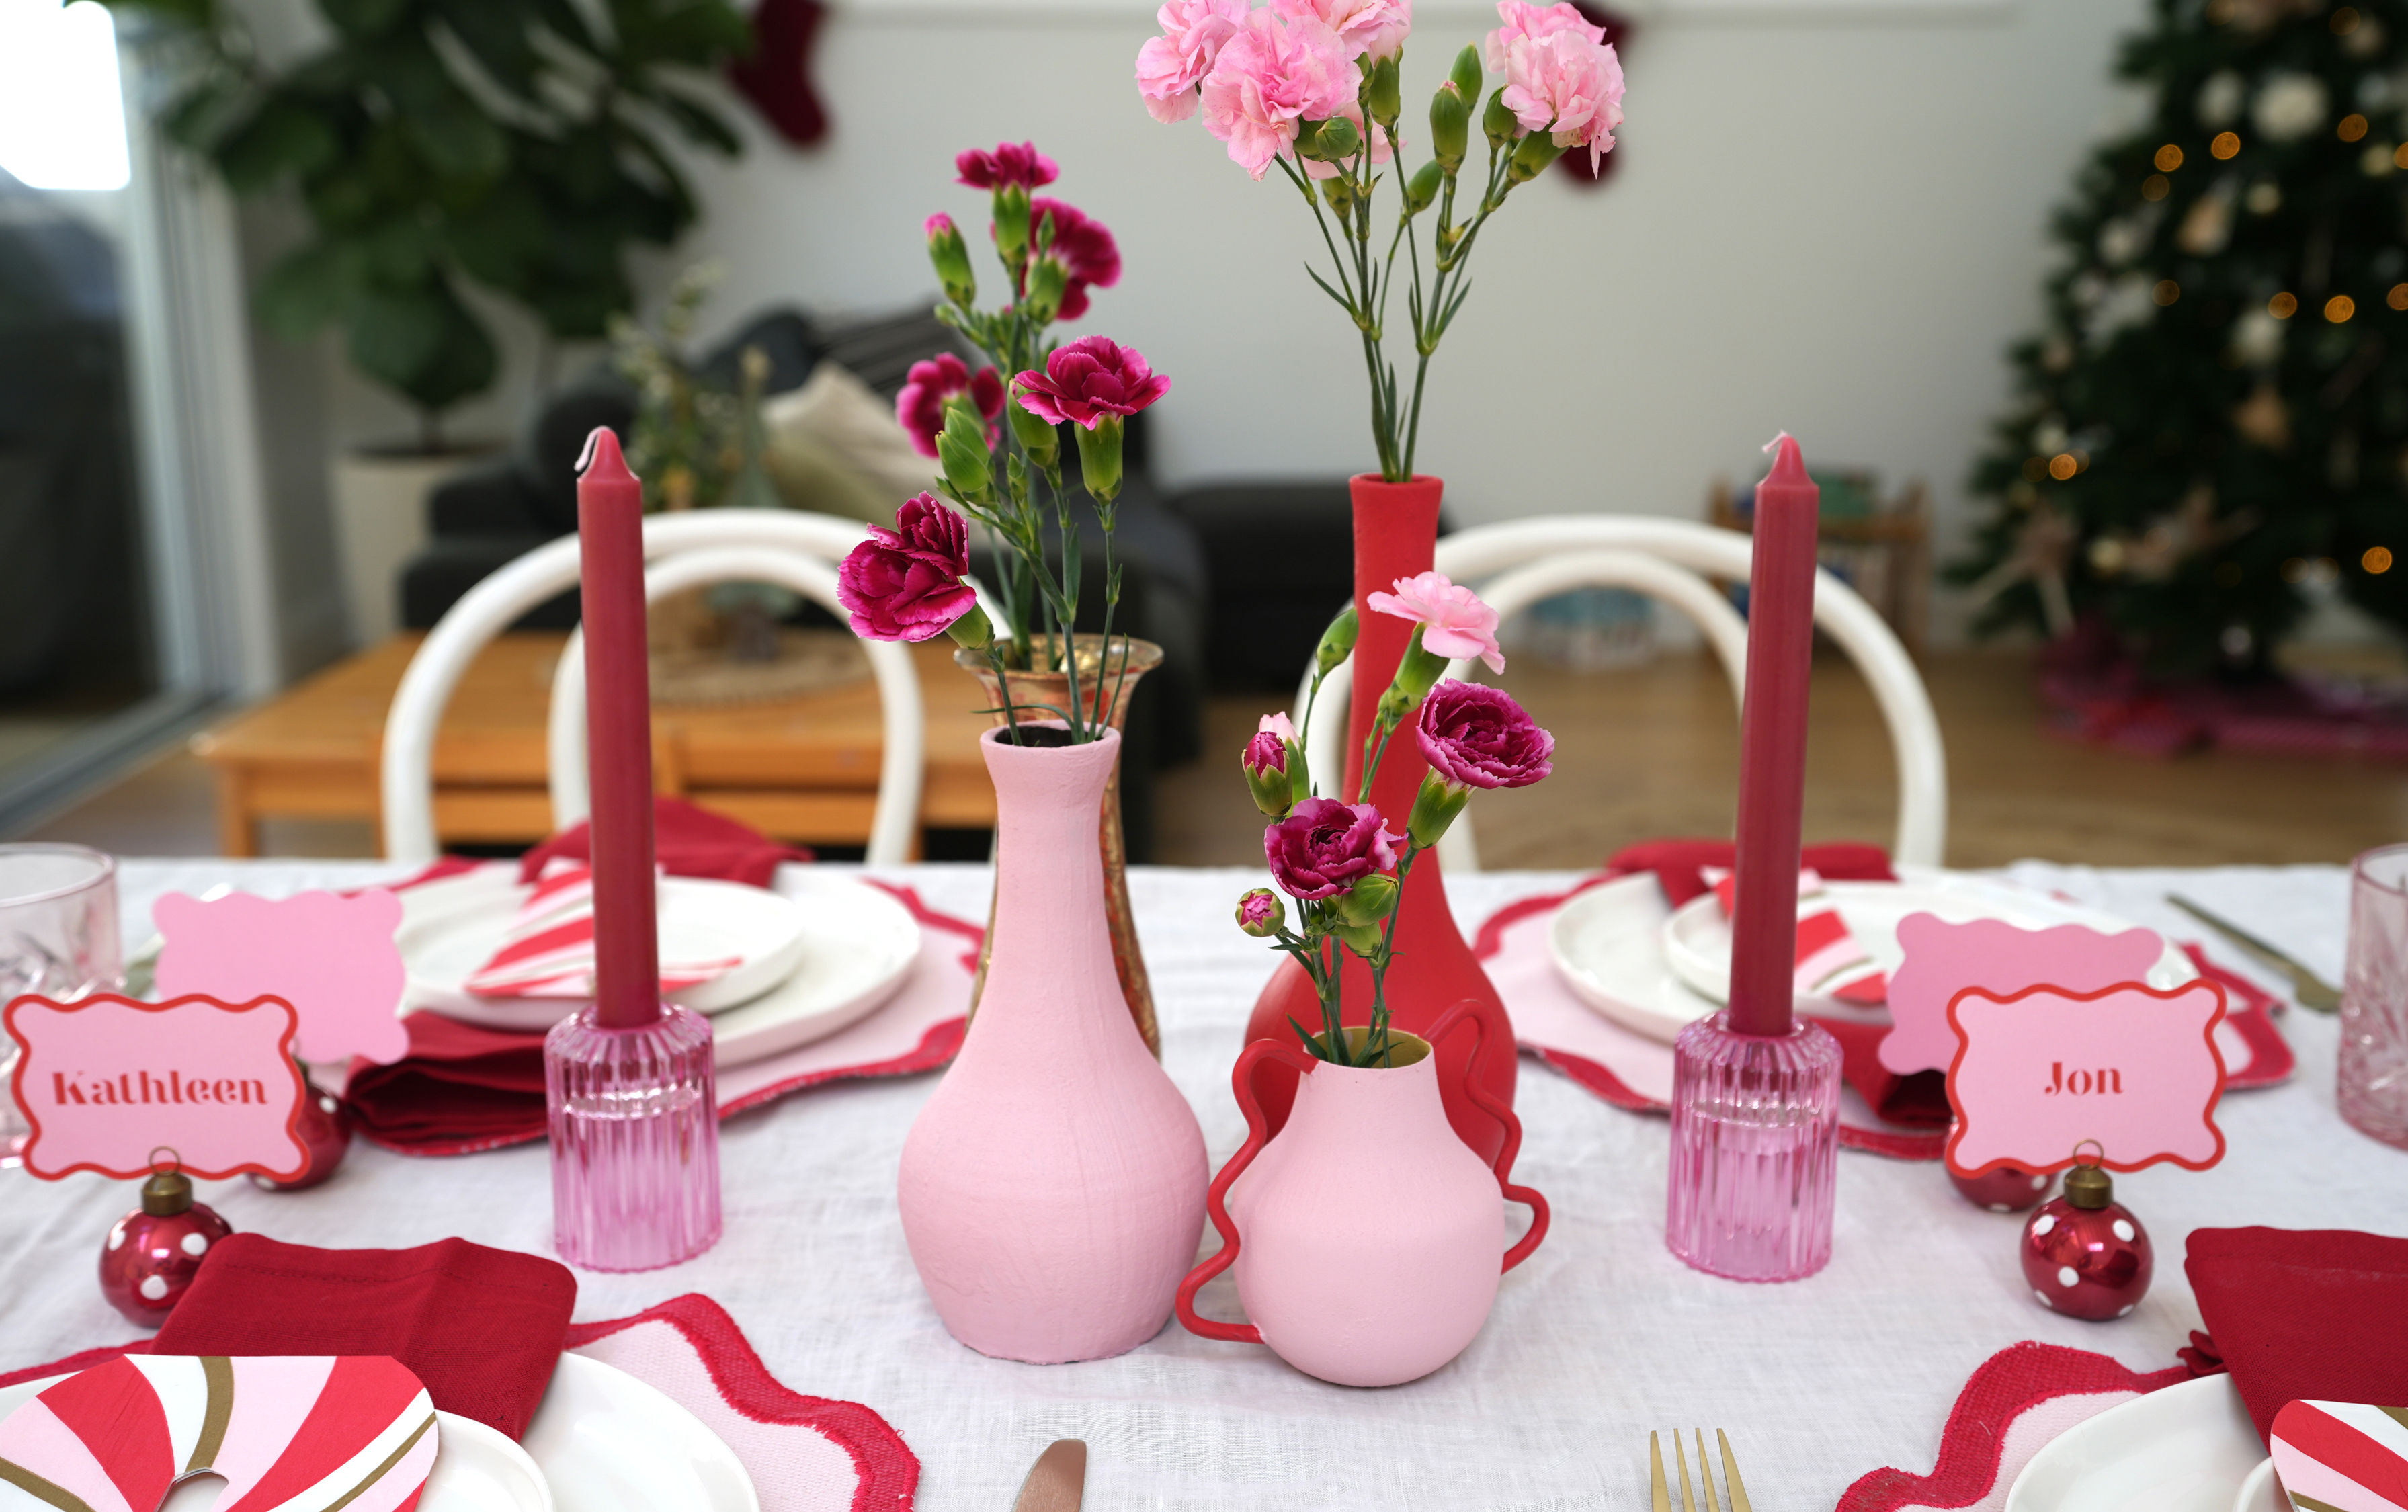 Painted vases on Christmas table